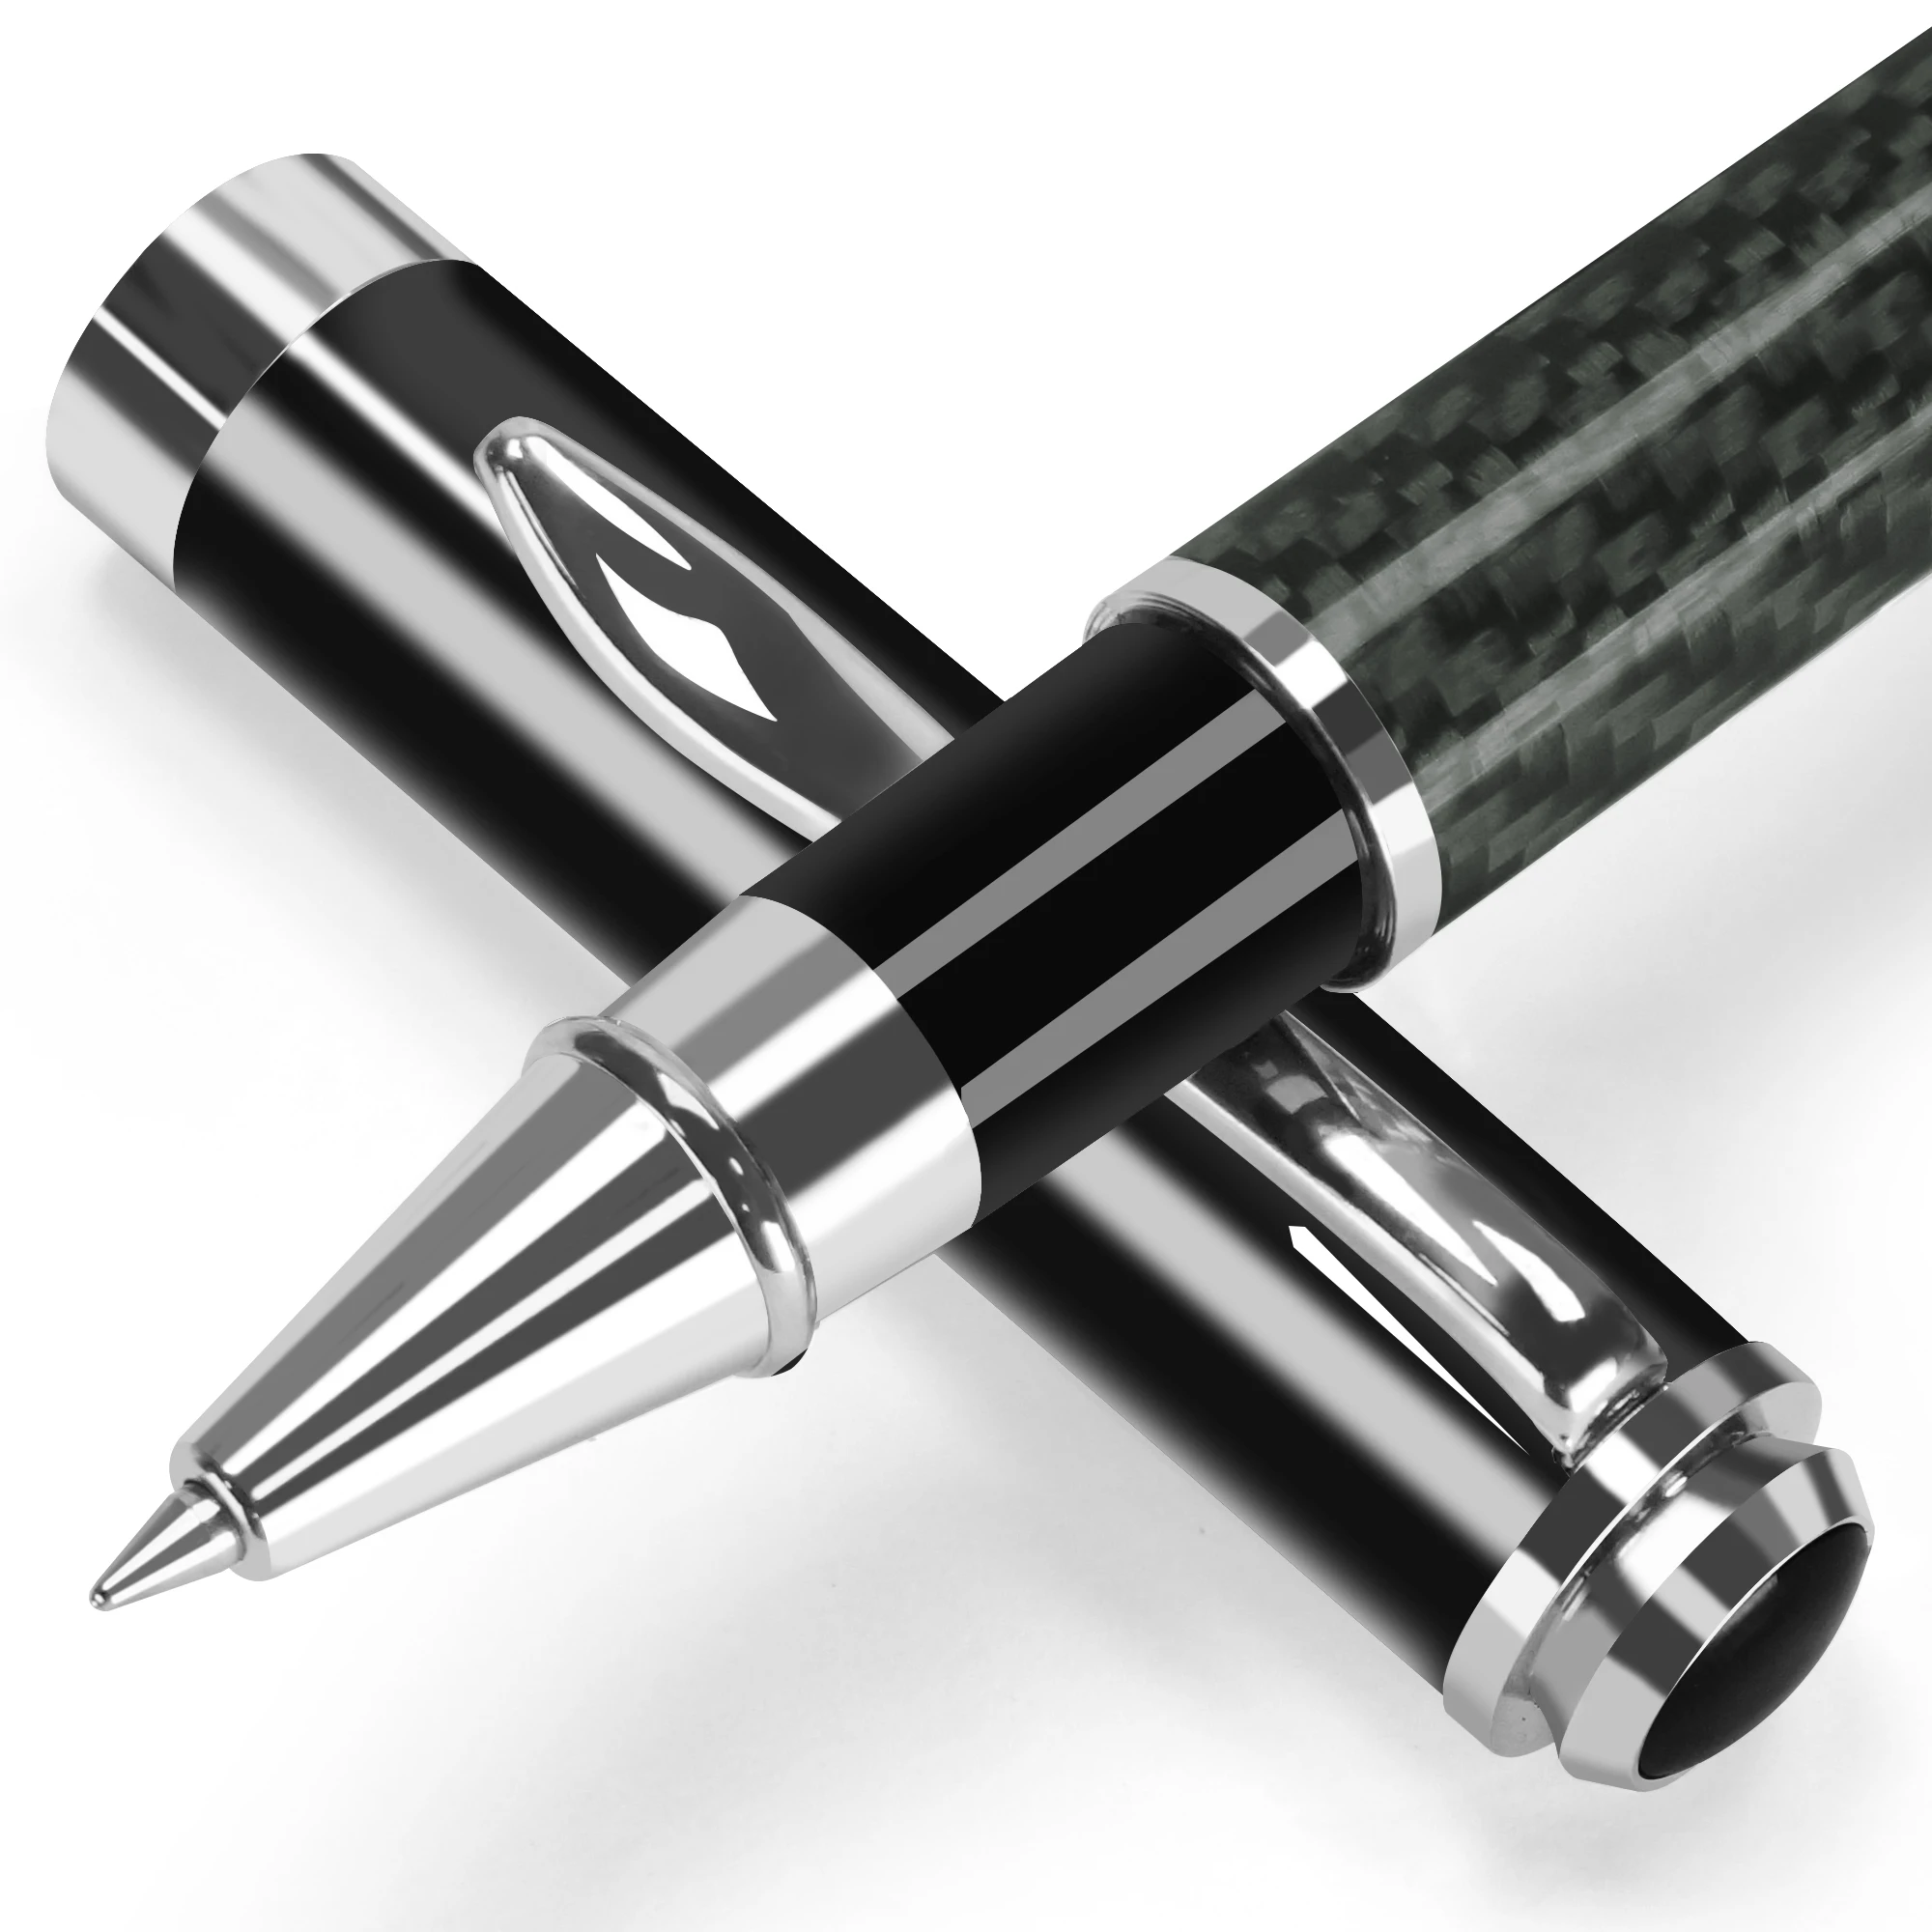 STONEGO Carbon Fiber Signature Pen, Premium Metal Gel Ink Pens Micro Point 0.5mm Black Ink Smooth Writing Ball Pen